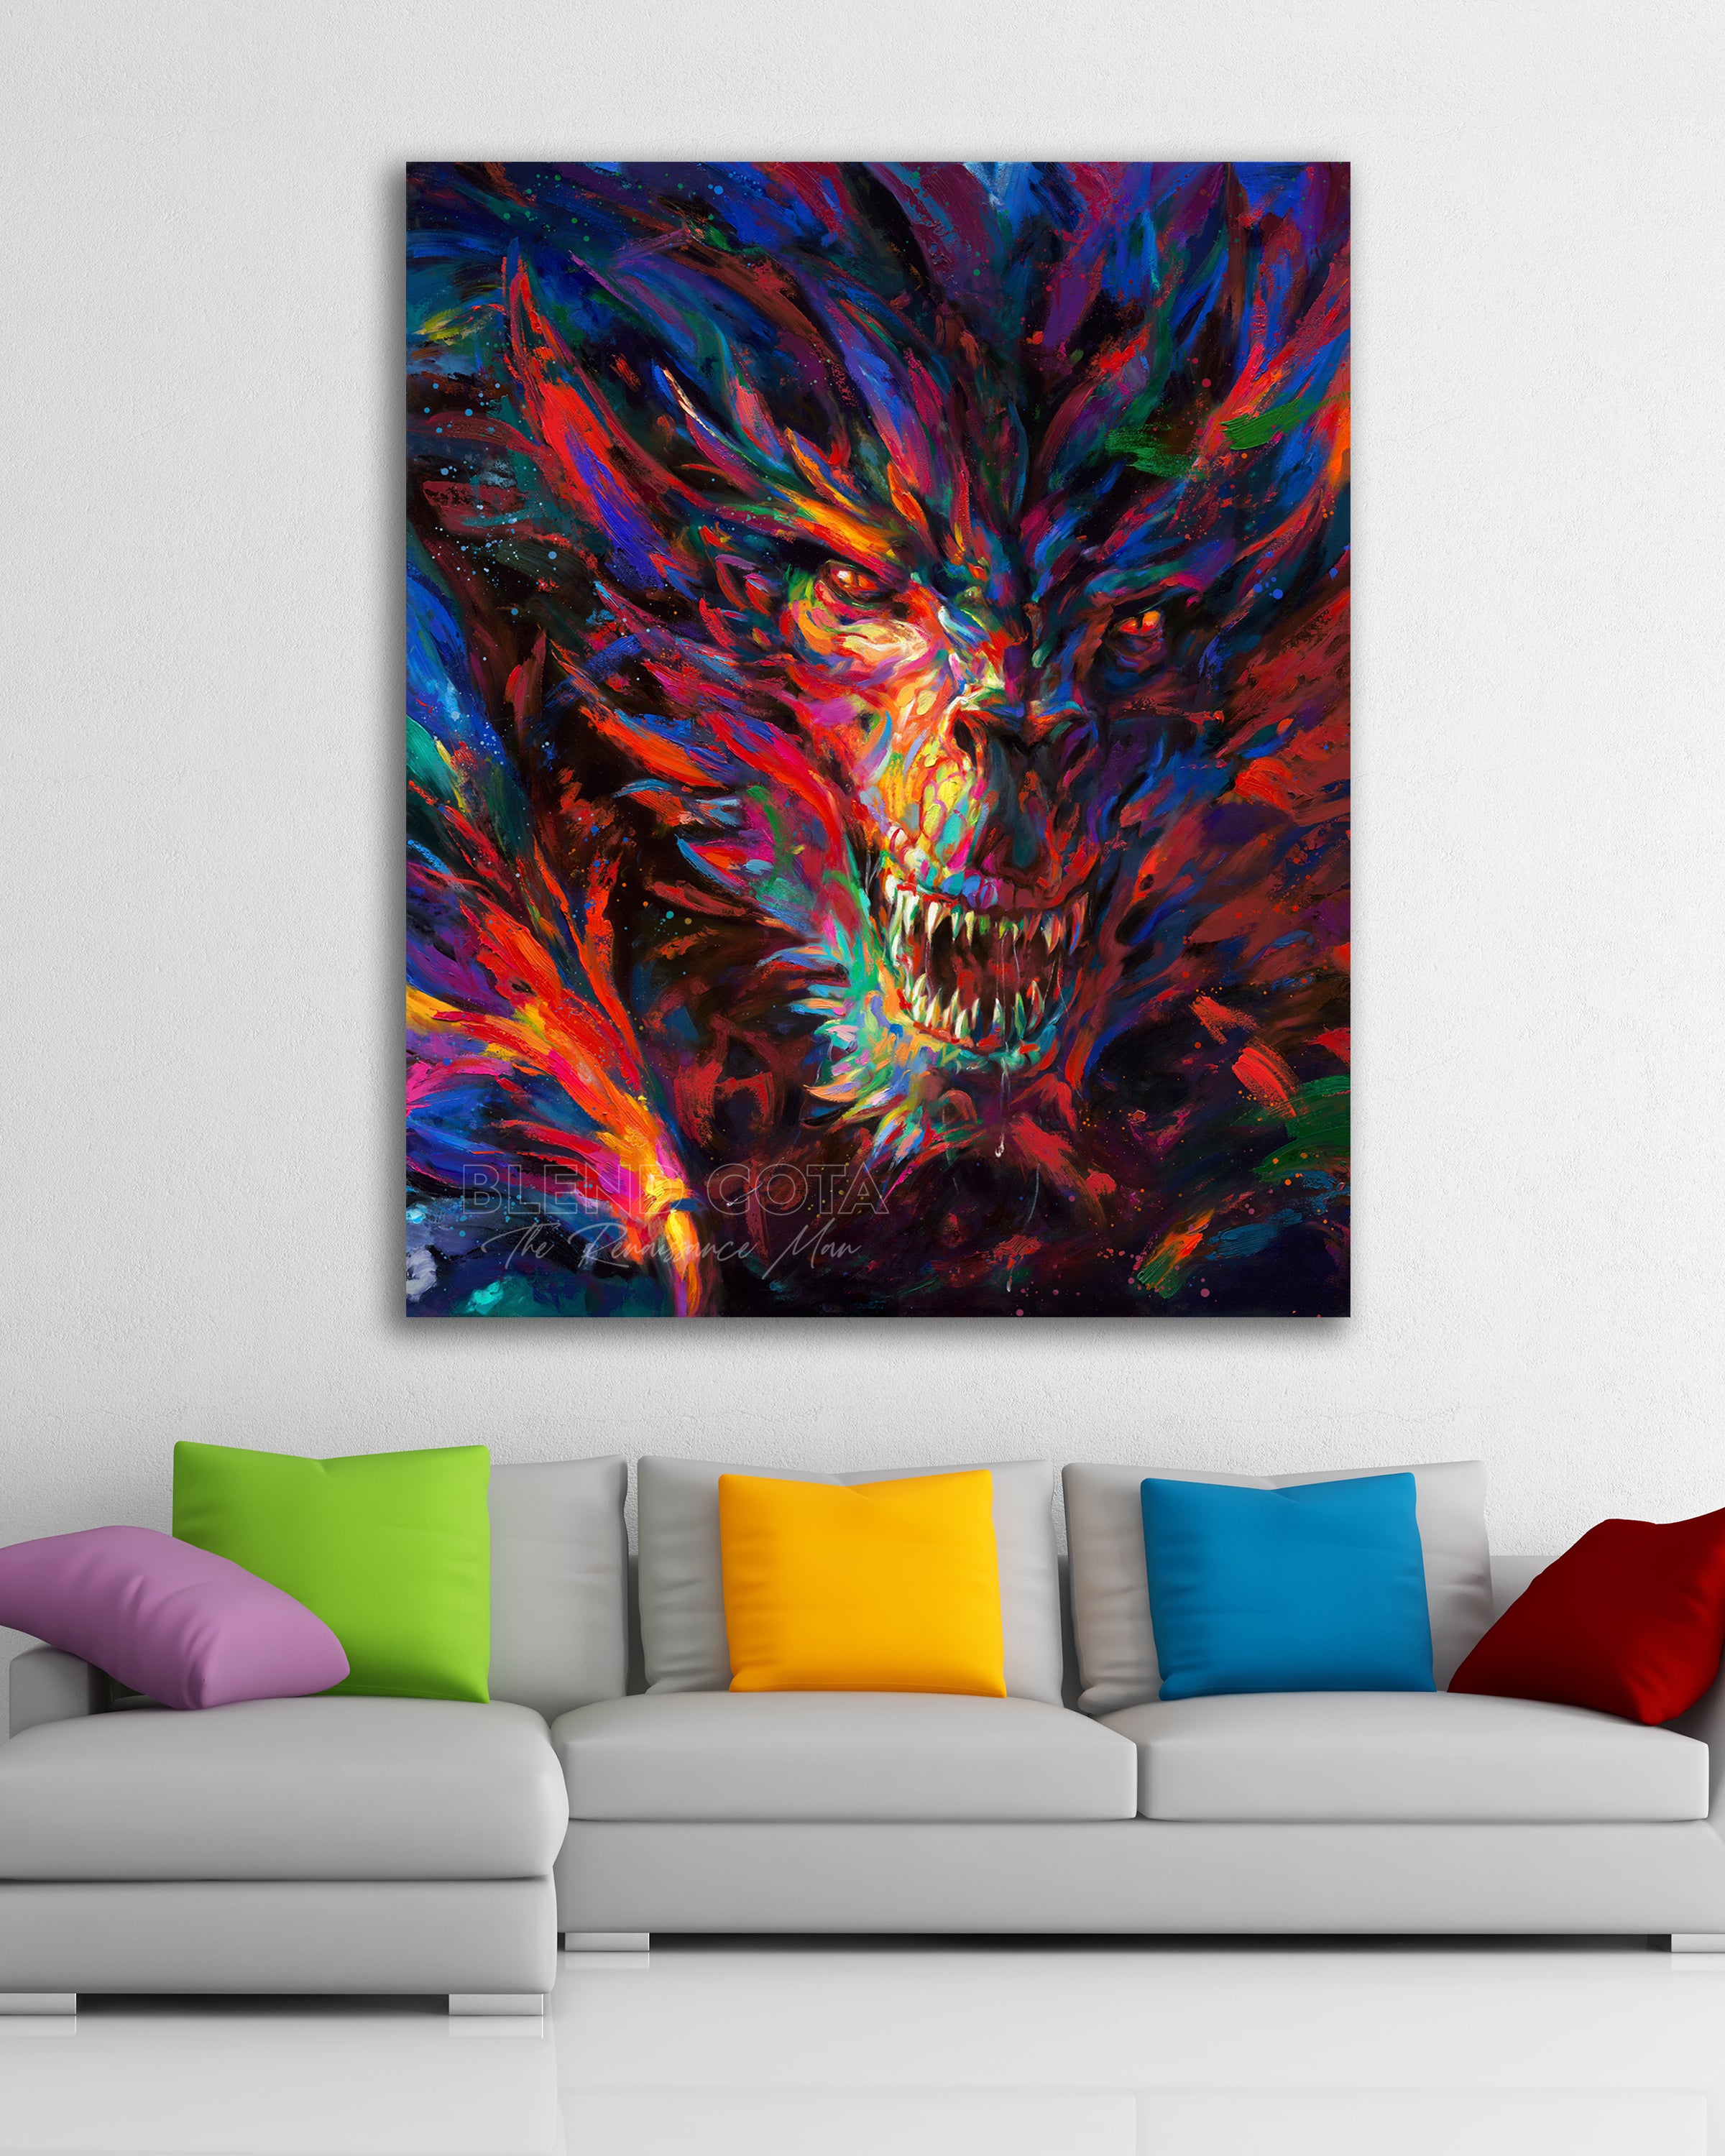 Original oil painting on canvas of the dragon of war, legendary mythical being engulfed in red and blue flame, emerging from darkness with colorful brushstrokes in an expressionistic style in a room setting.